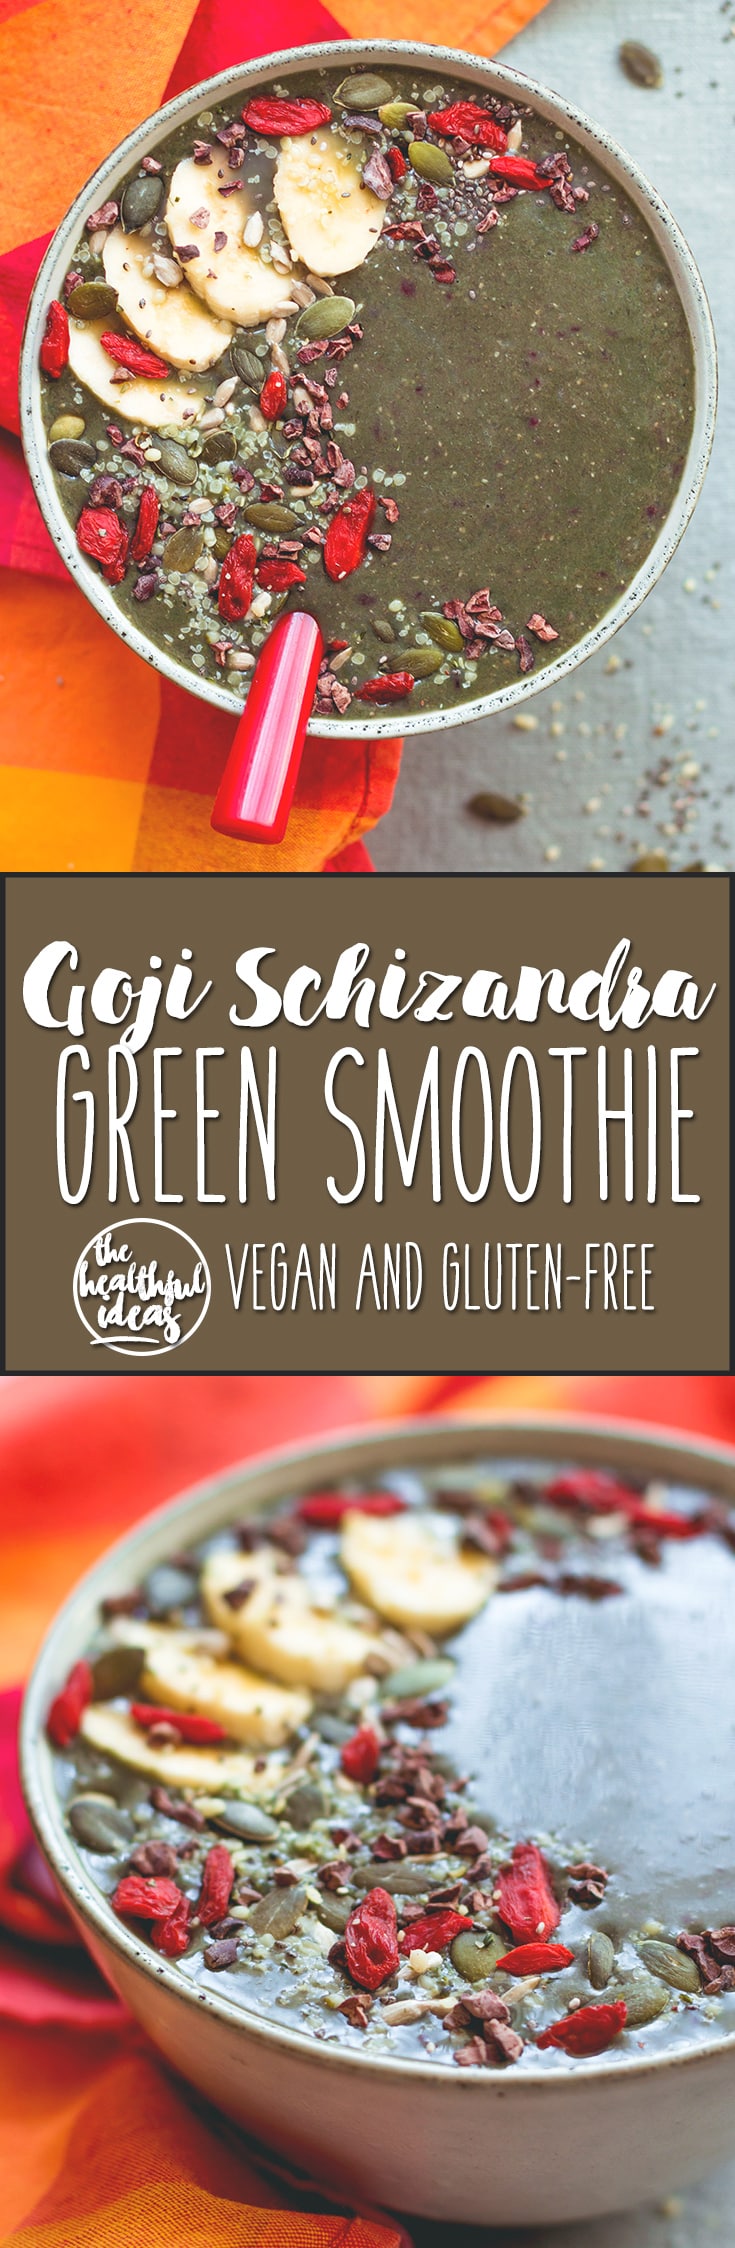 Goji Schizandra Green Smoothie - a green smoothie that actually tastes good! Full of antioxidants and all things health. I love this smoothie recipe and you will too! | thehealthfulideas.com